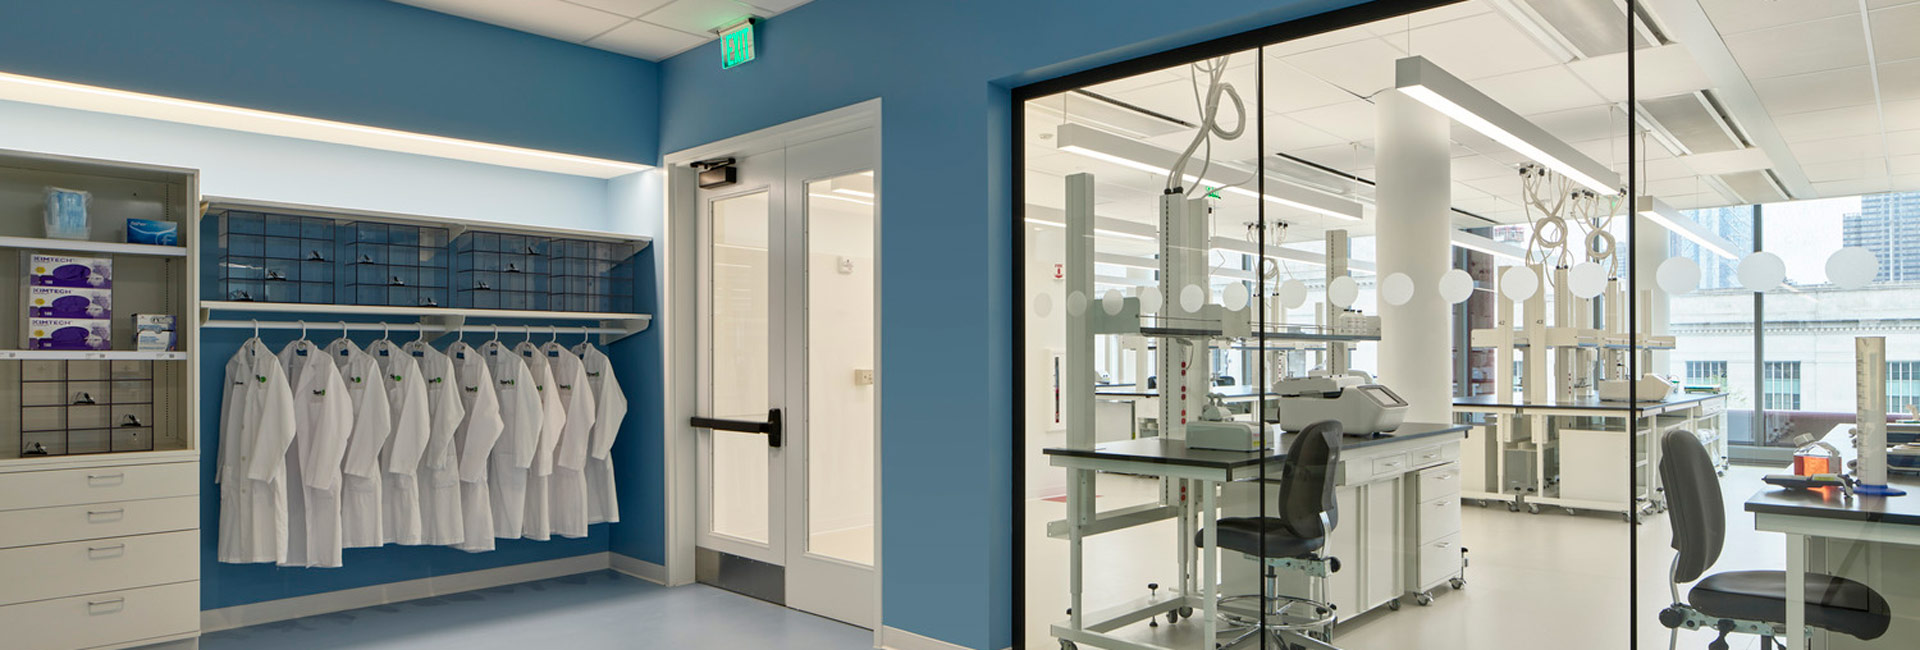 Outside view of the research lab at Spark Therapeutics